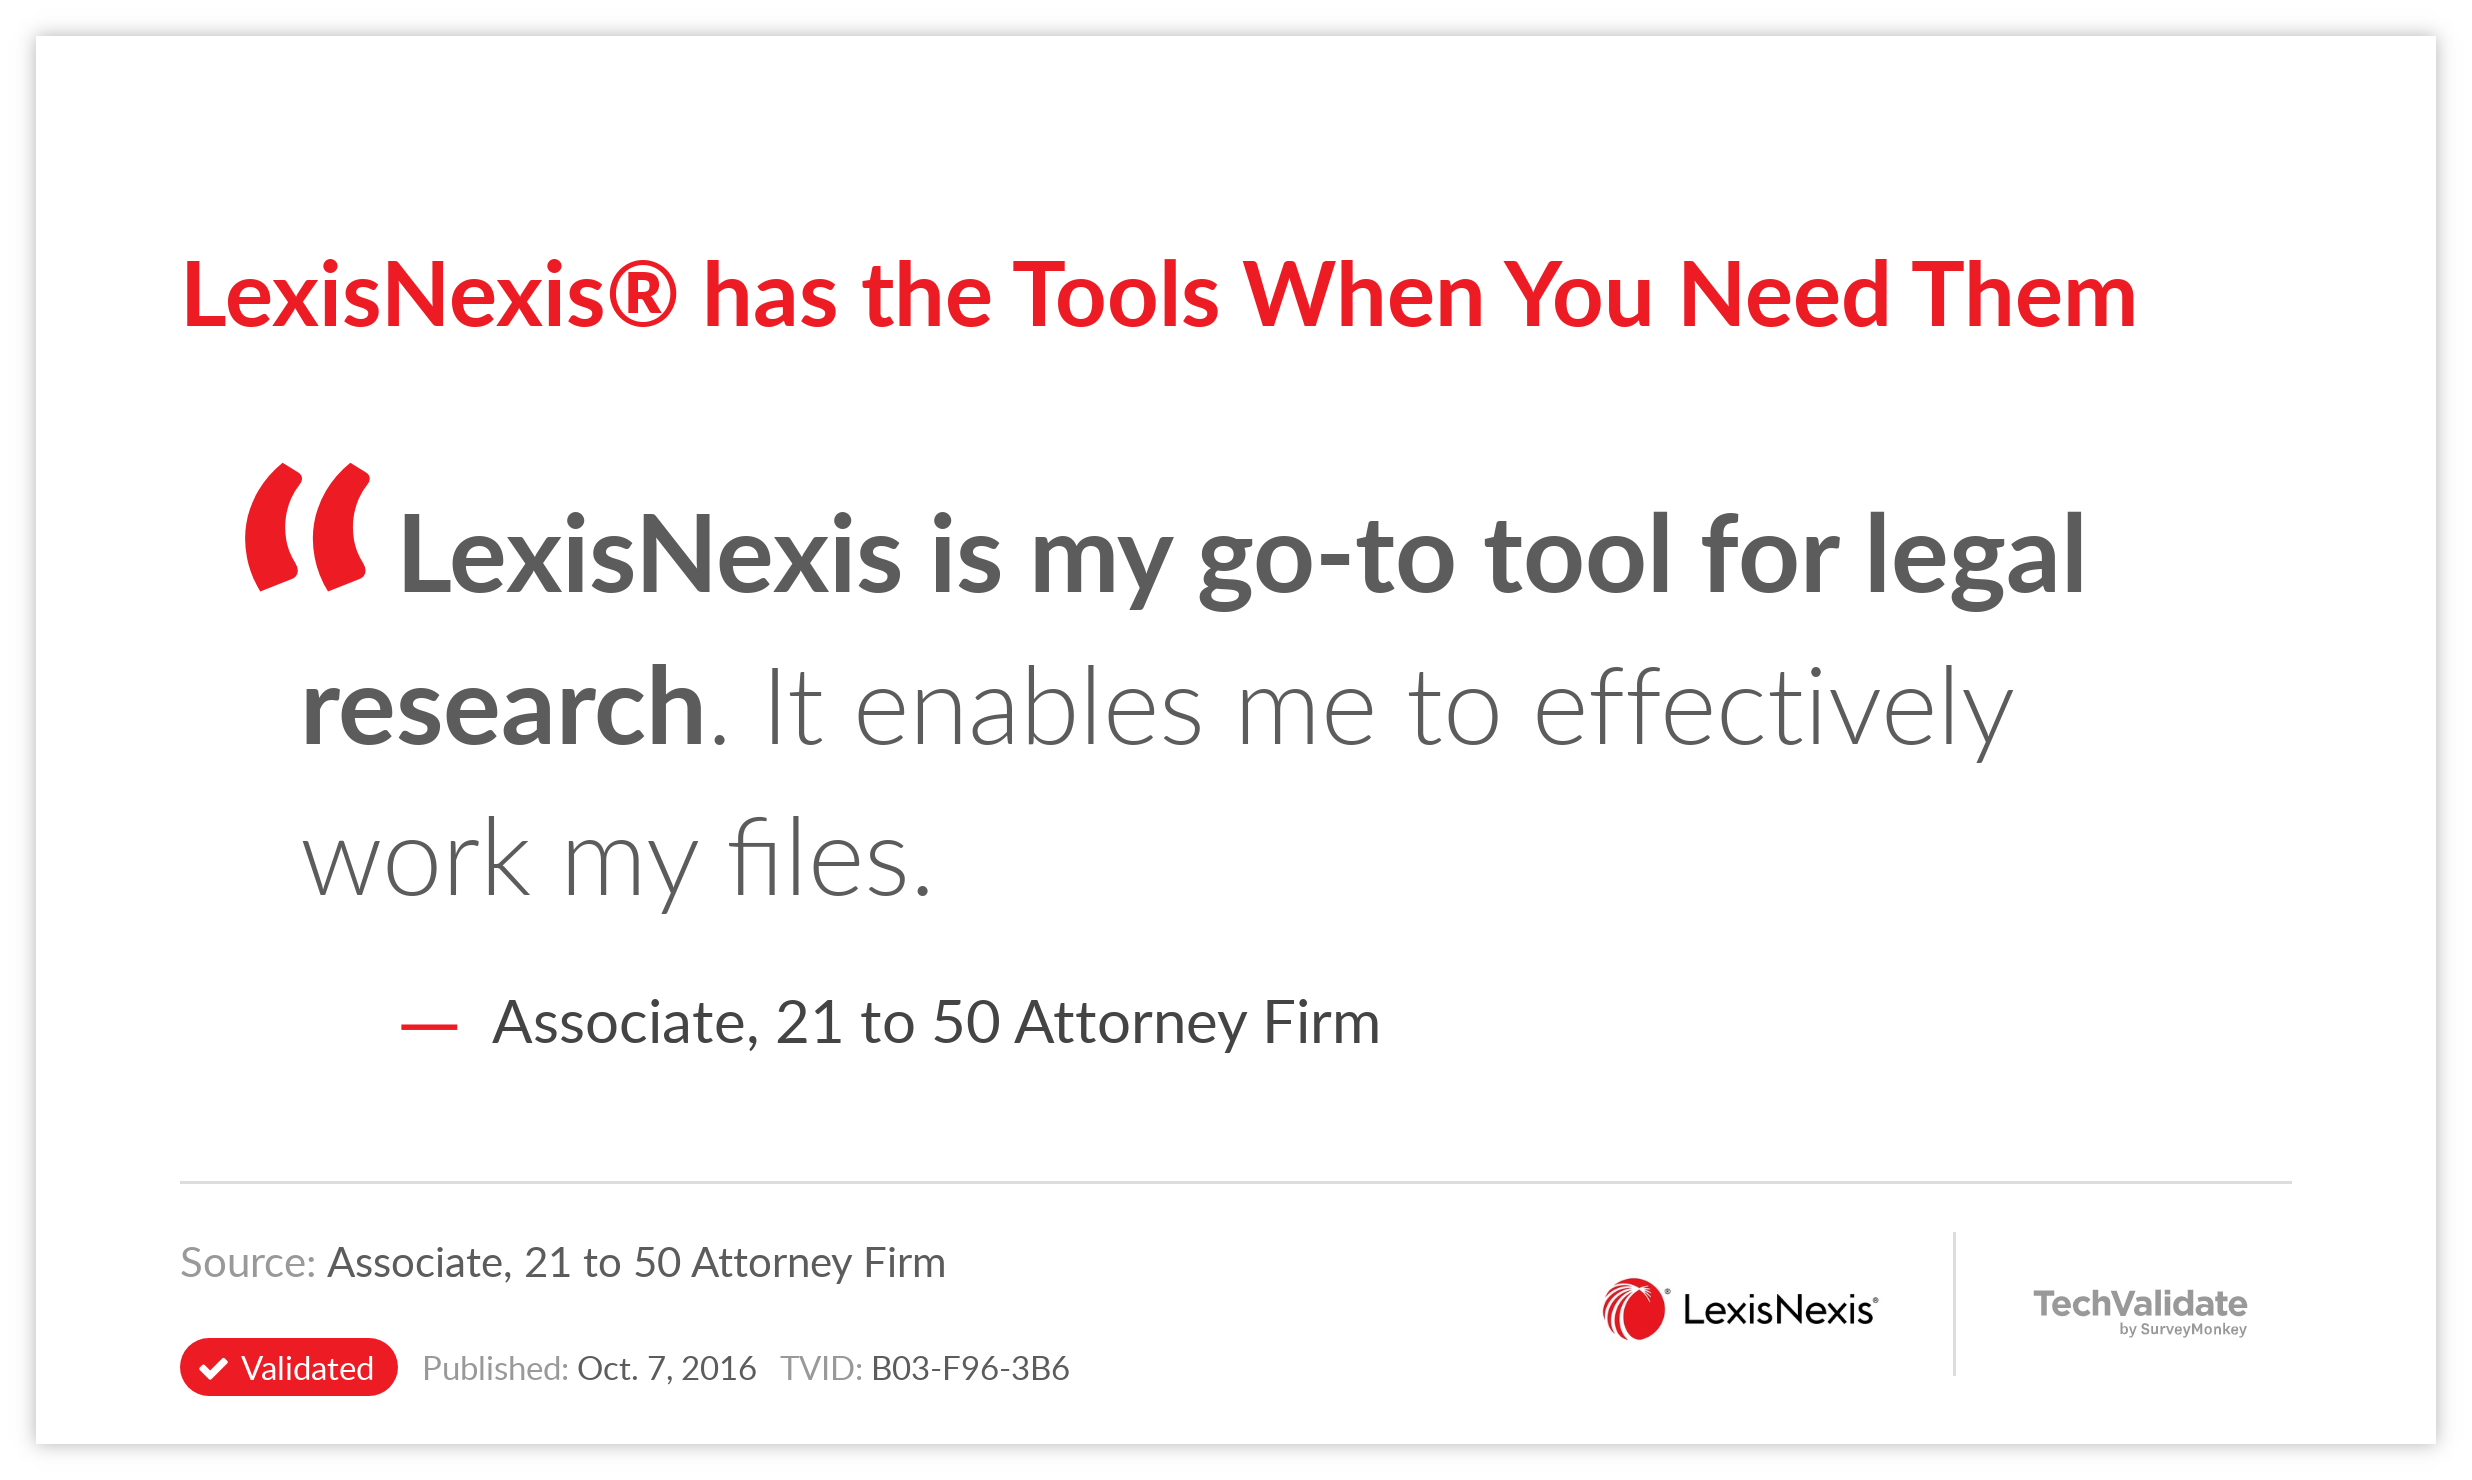 LexisNexis® has the Tools When You Need Them